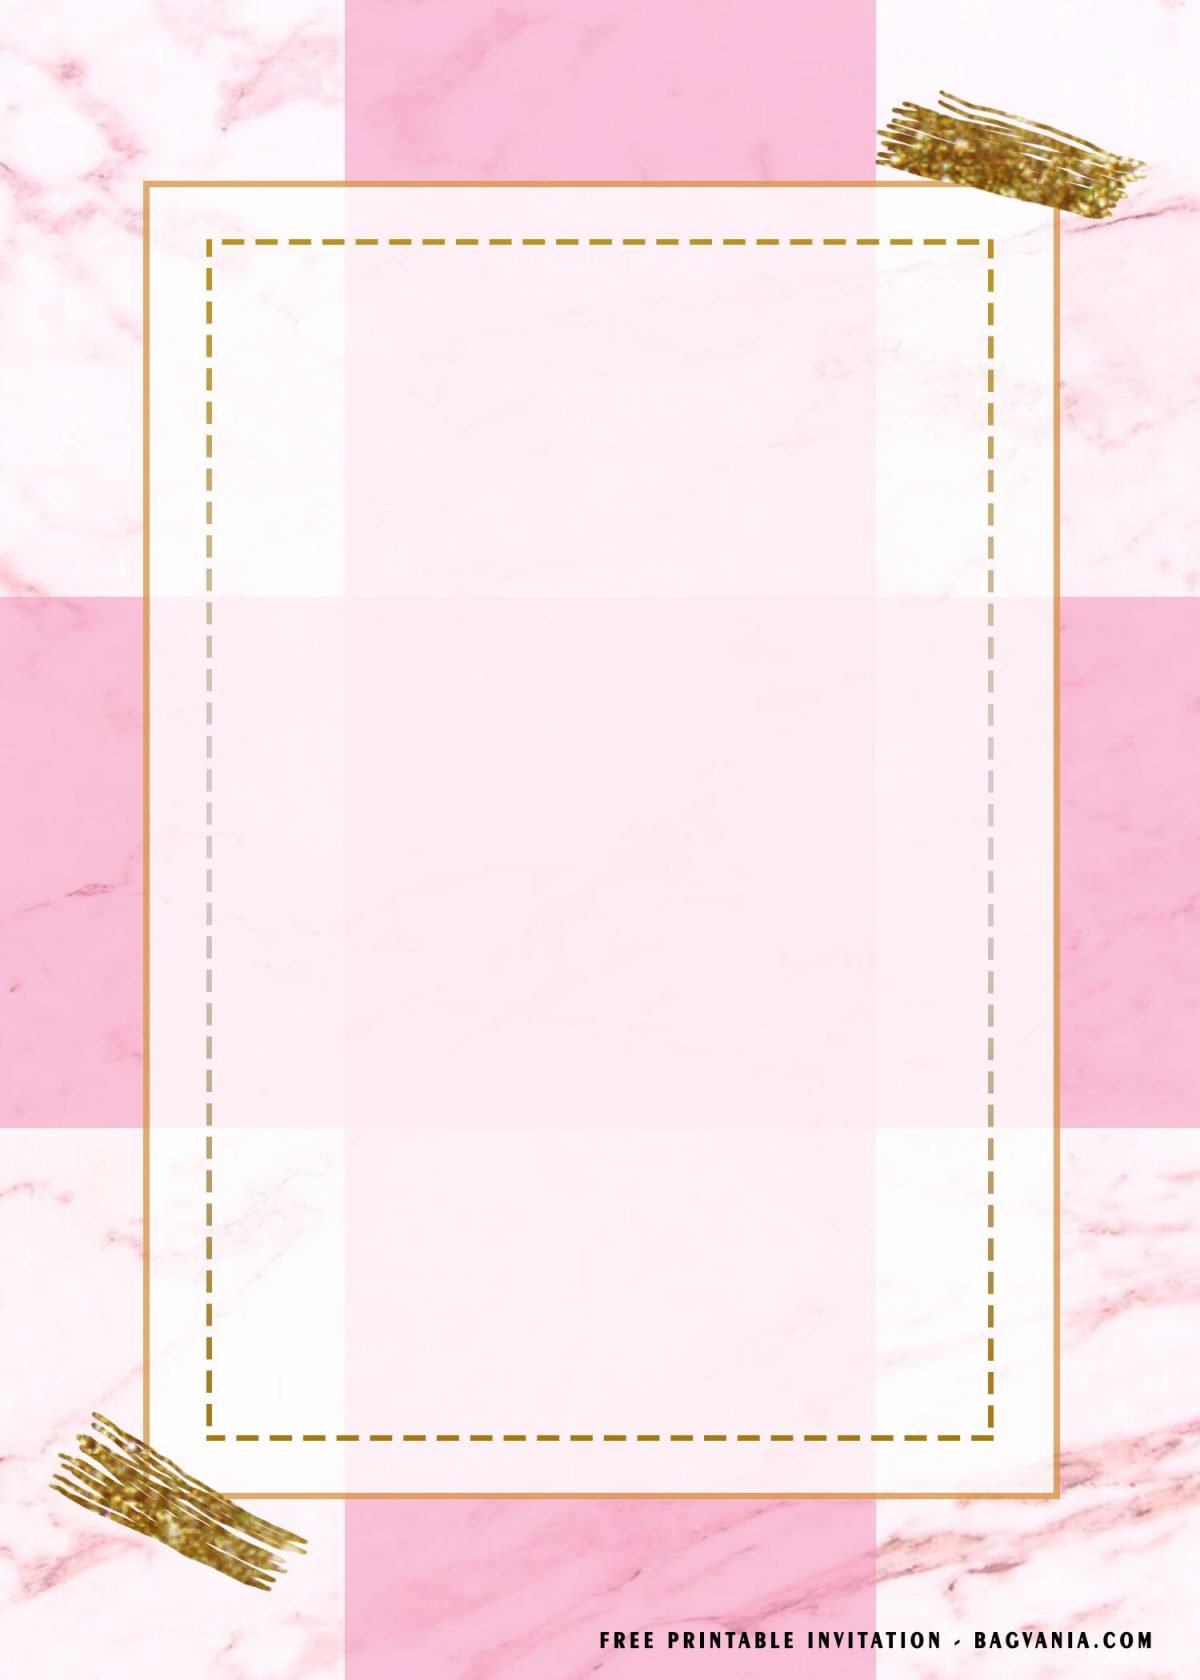 Free Printable Blank Rectangle Birthday Invitation Templates With Marble Style Background